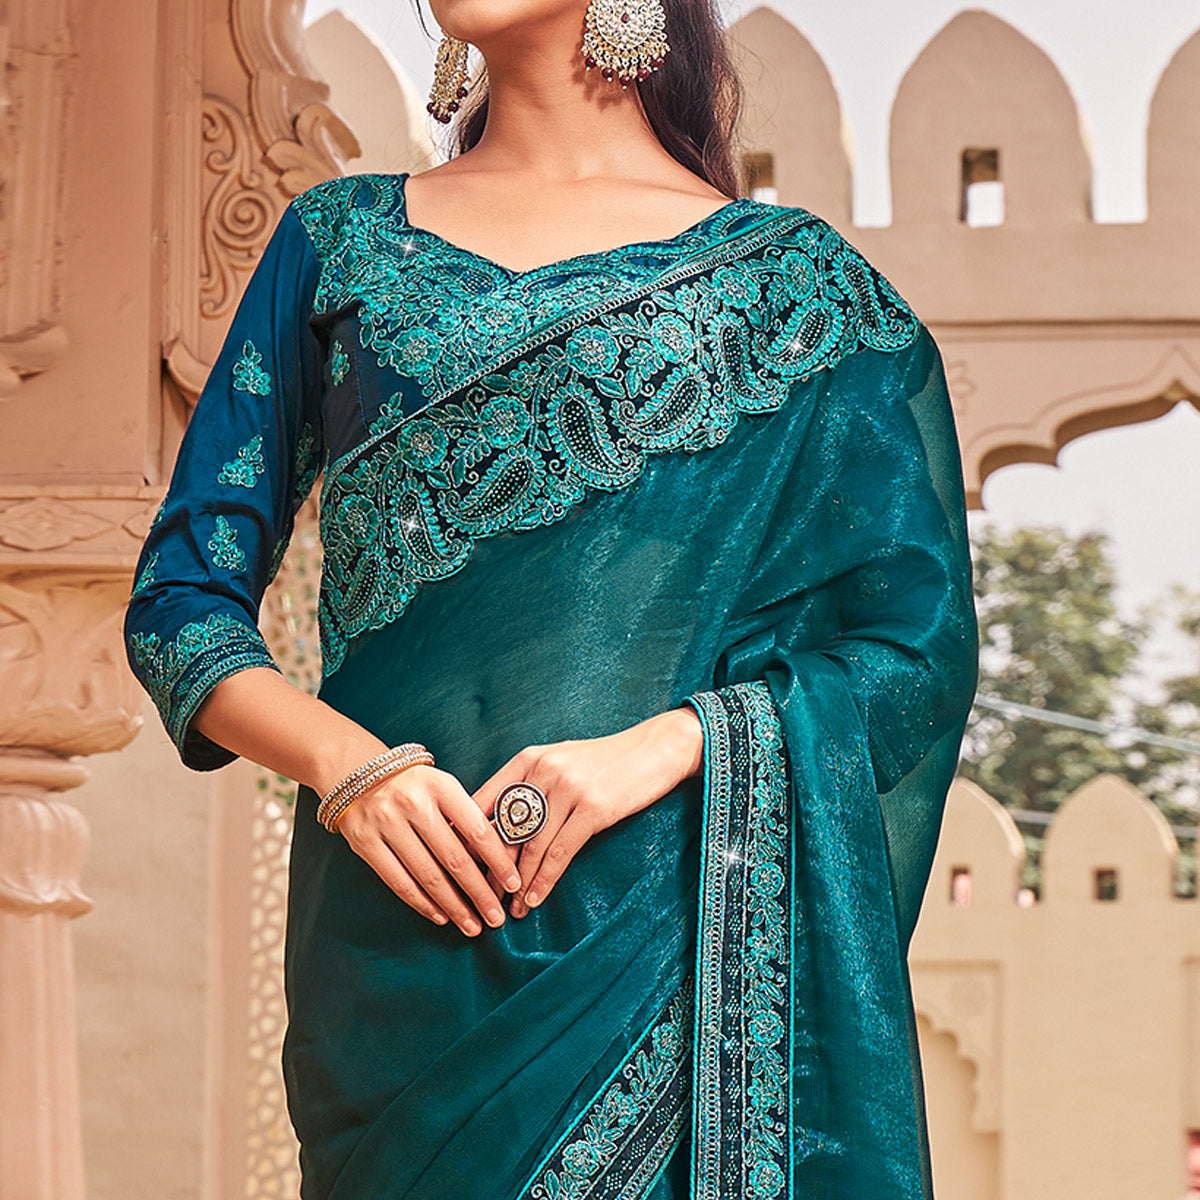 Teal Solid With Embroidered Border Chiffon Saree